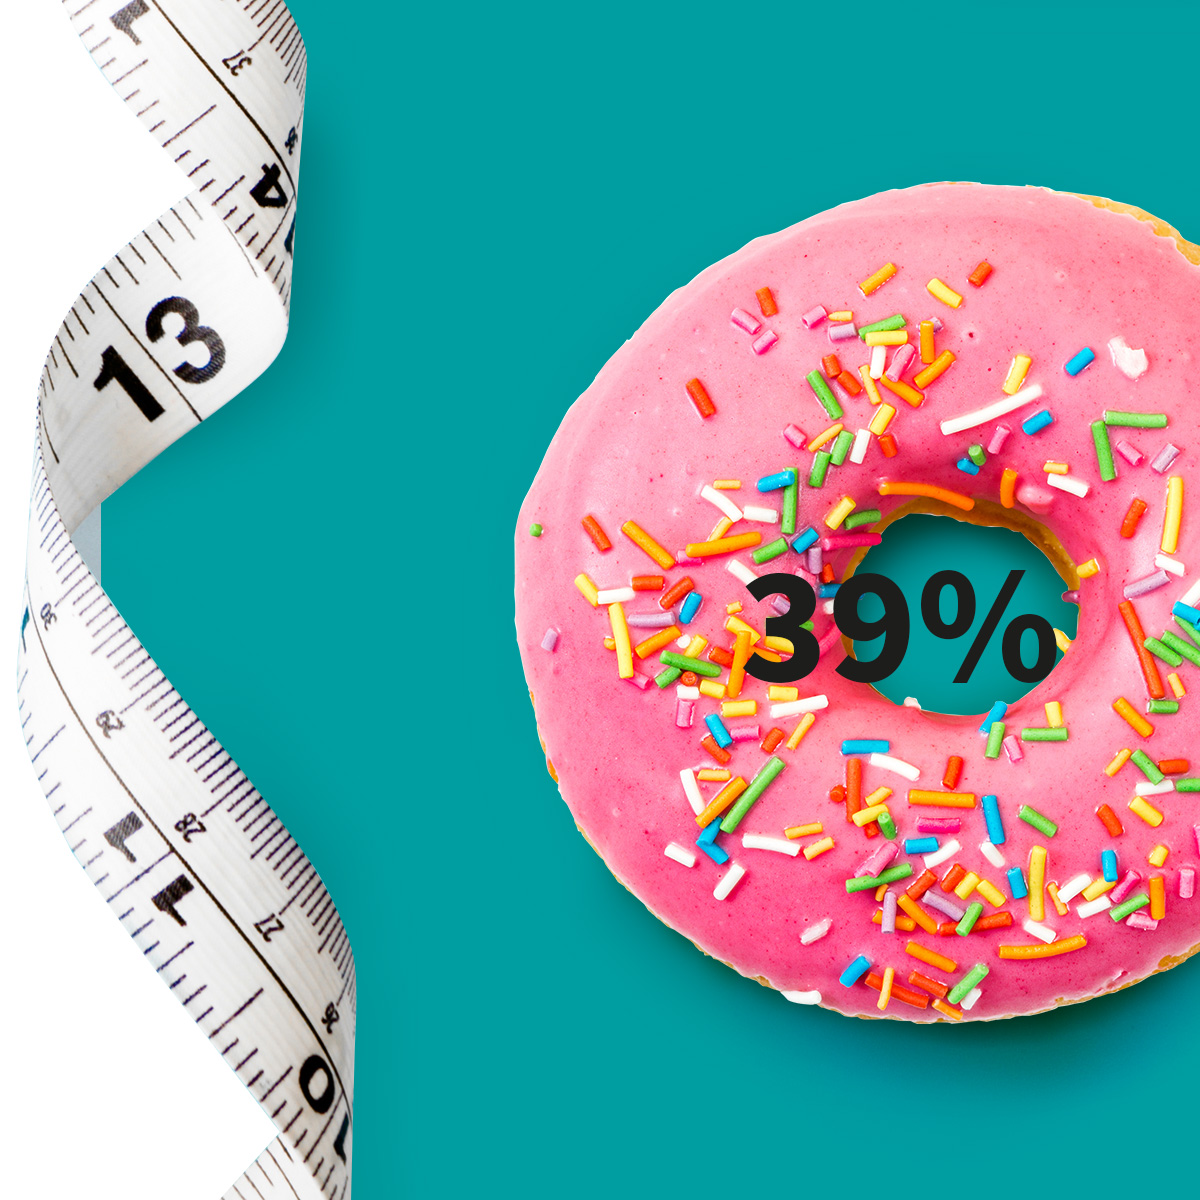 [.NL-fr Netherlands (french)] •	A measuring tape and a doughnut with pink icing and colourful sugar sprinkle as a metaphor for obesity